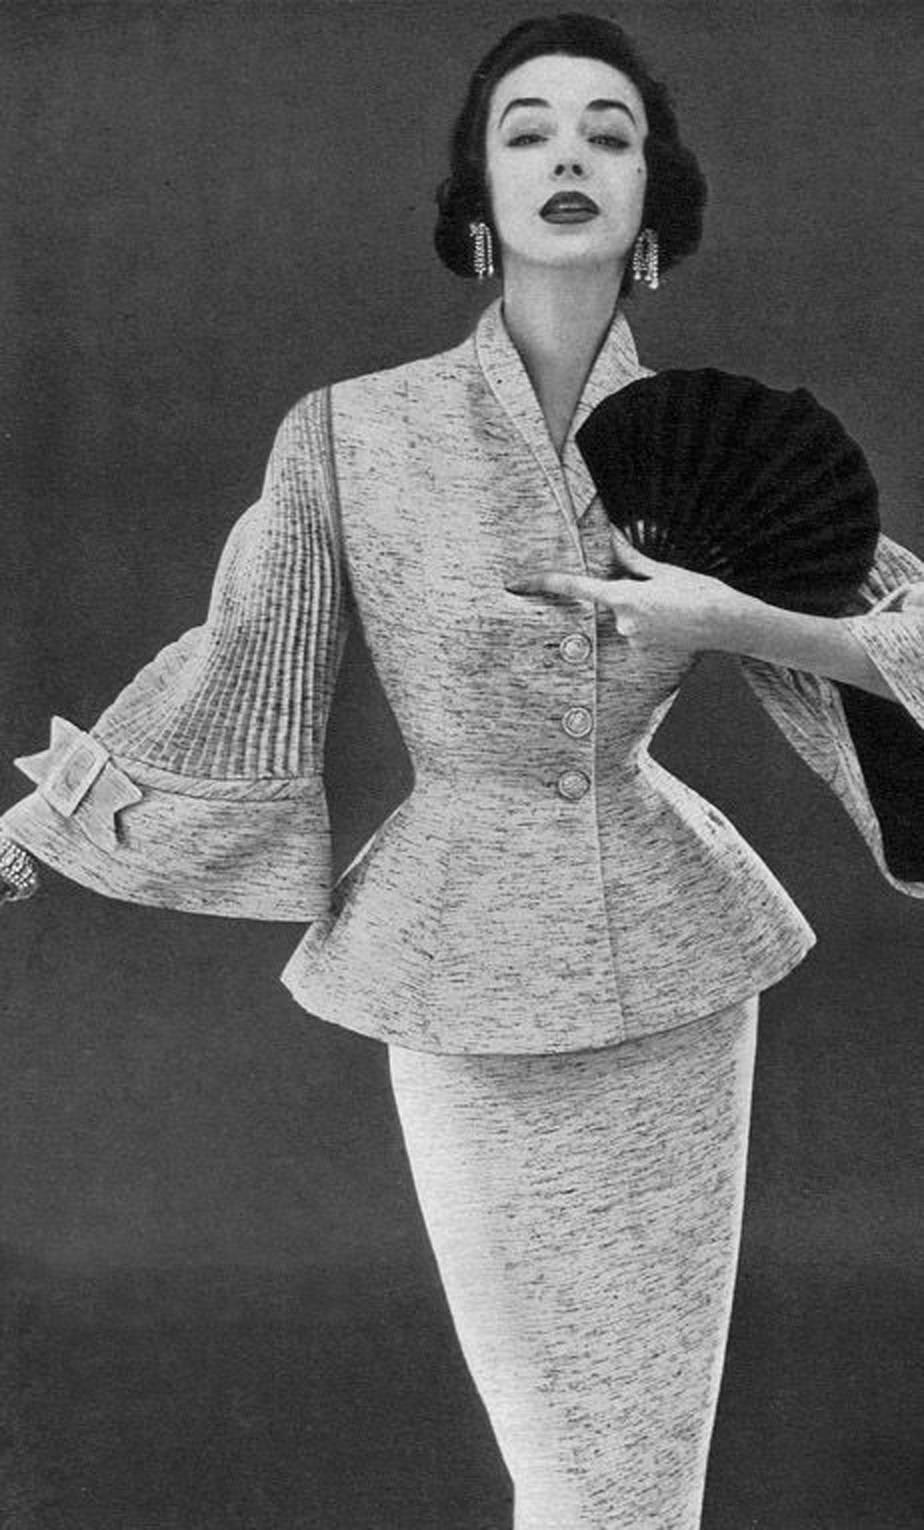 Lilli Ann was started in San Francisco in 1933 by Adolph Schuman, naming his company for his wife, Lillian. The company became known for their beautiful, elaborately designed suits and coats. This stunning documented  ensemble from 1952 is fashioned